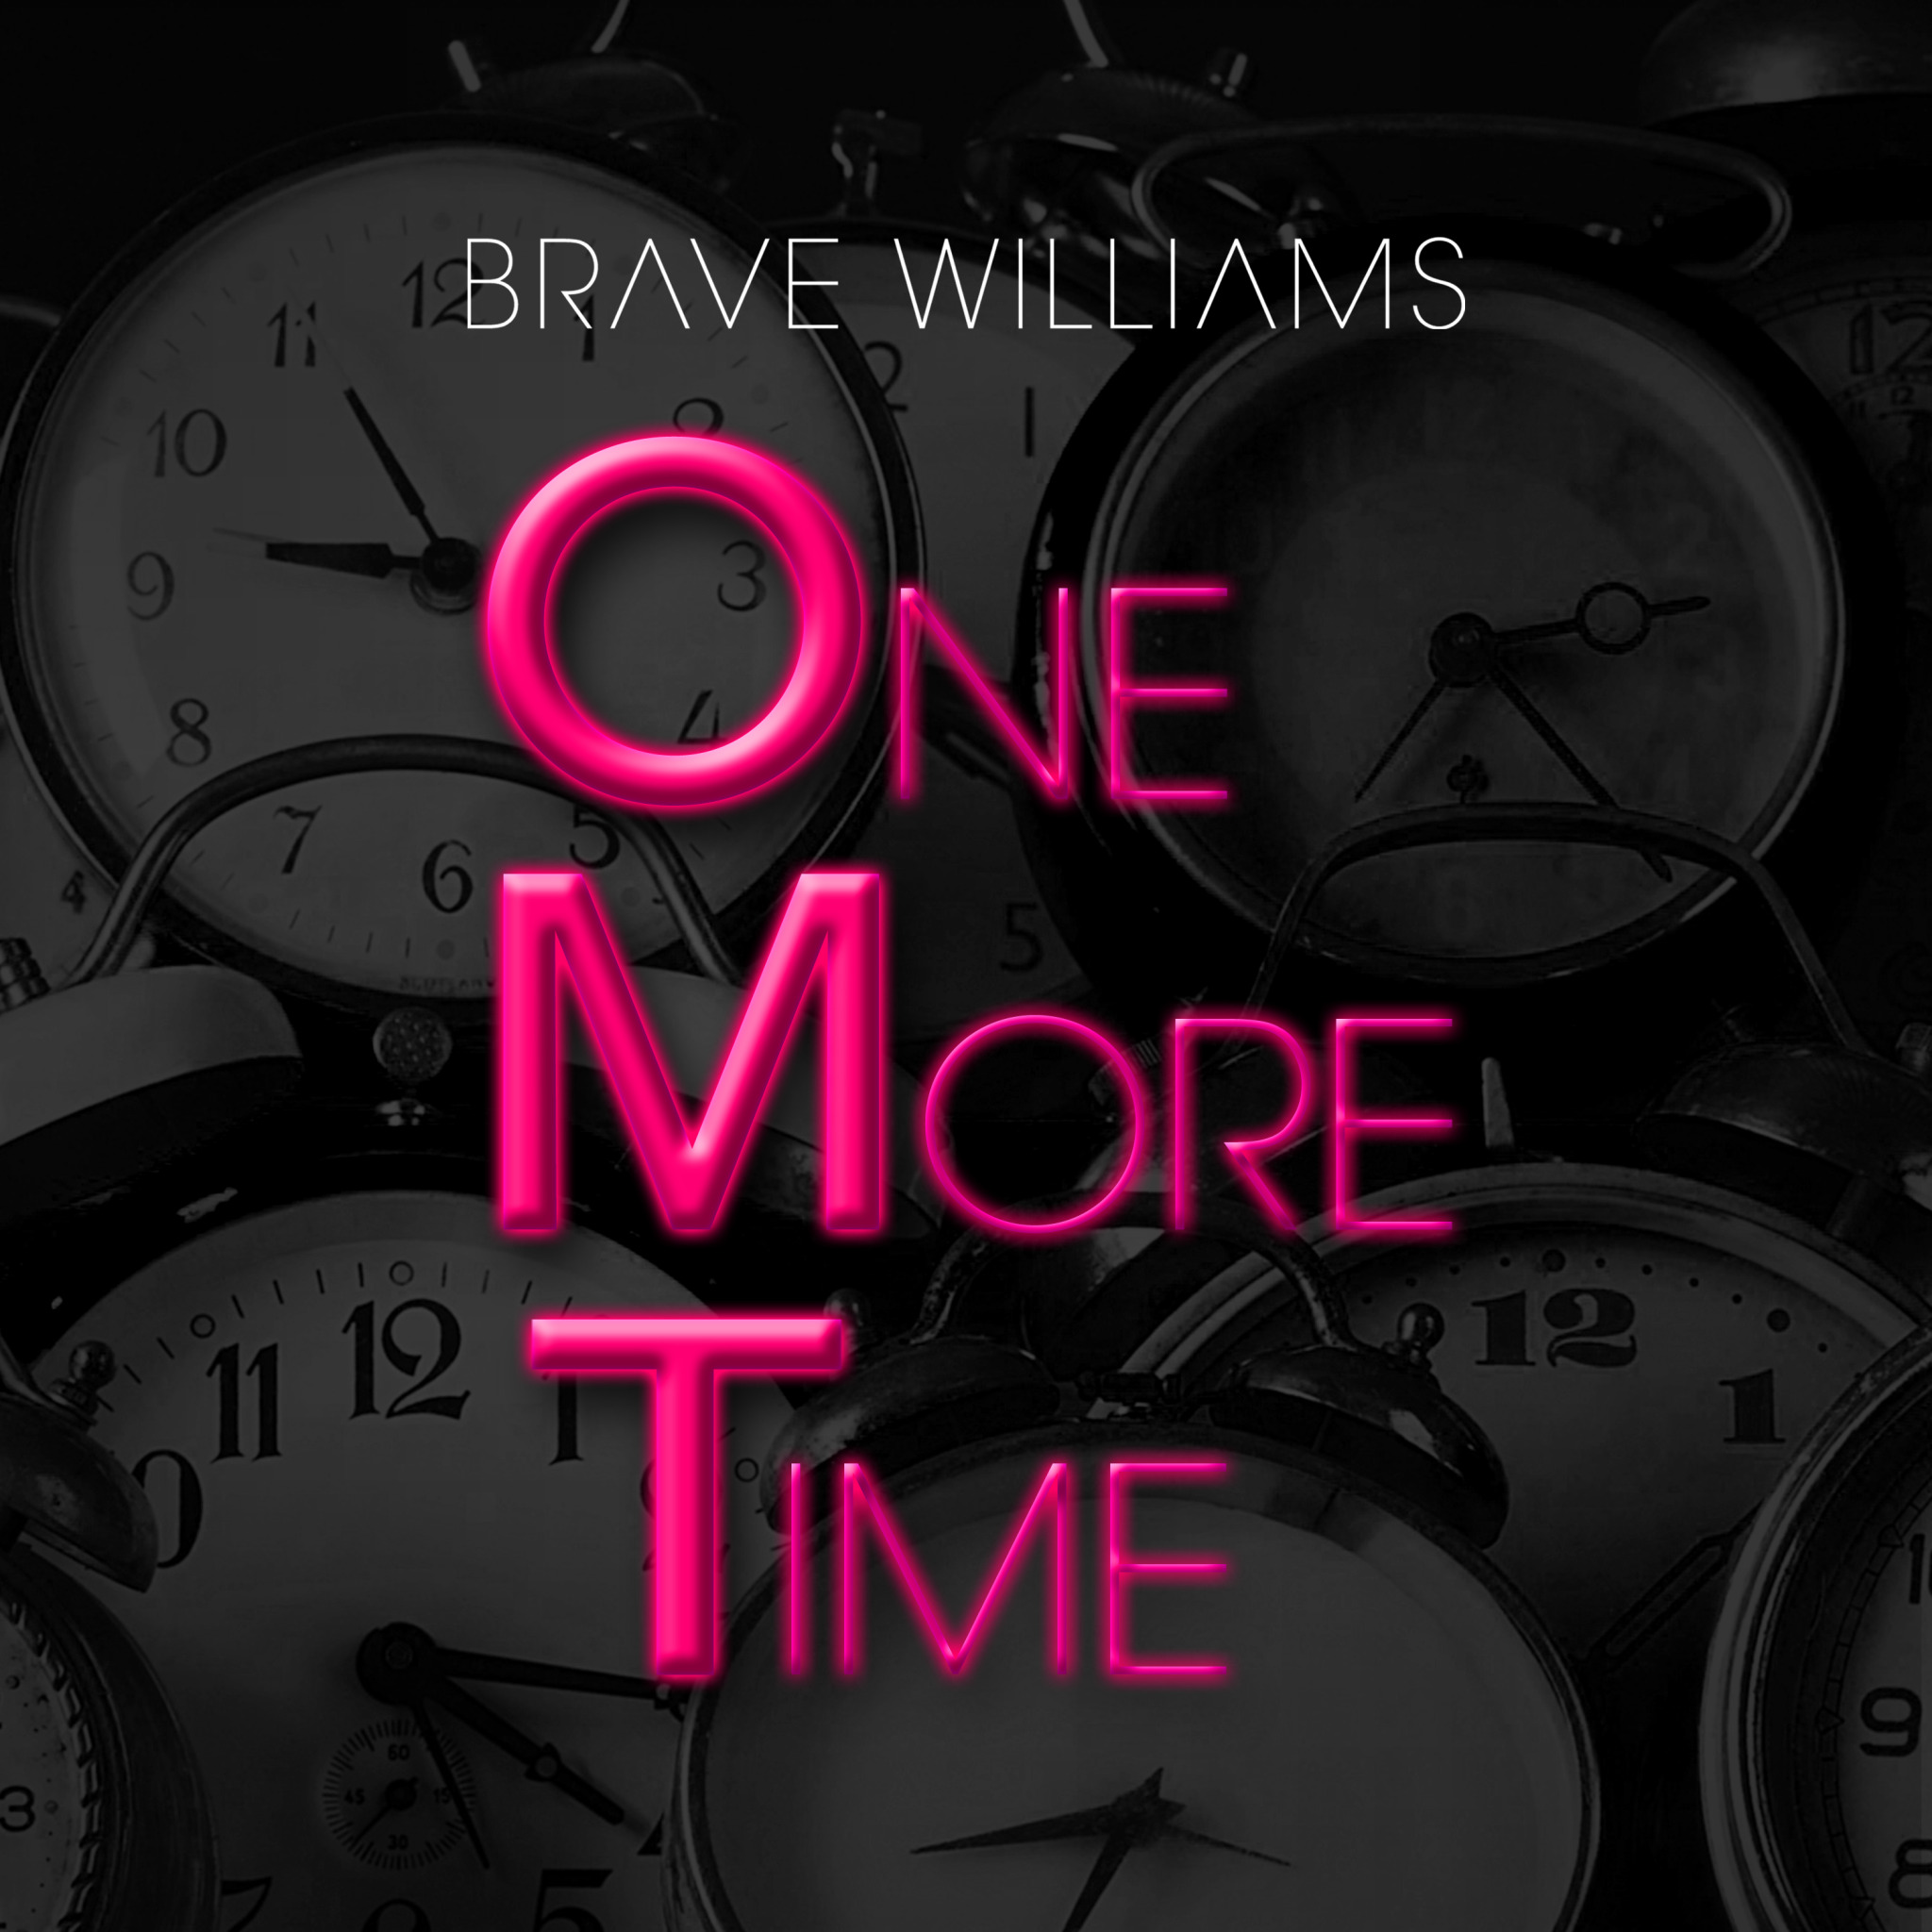 New Music: Brave Williams "OMT (One More Time)"